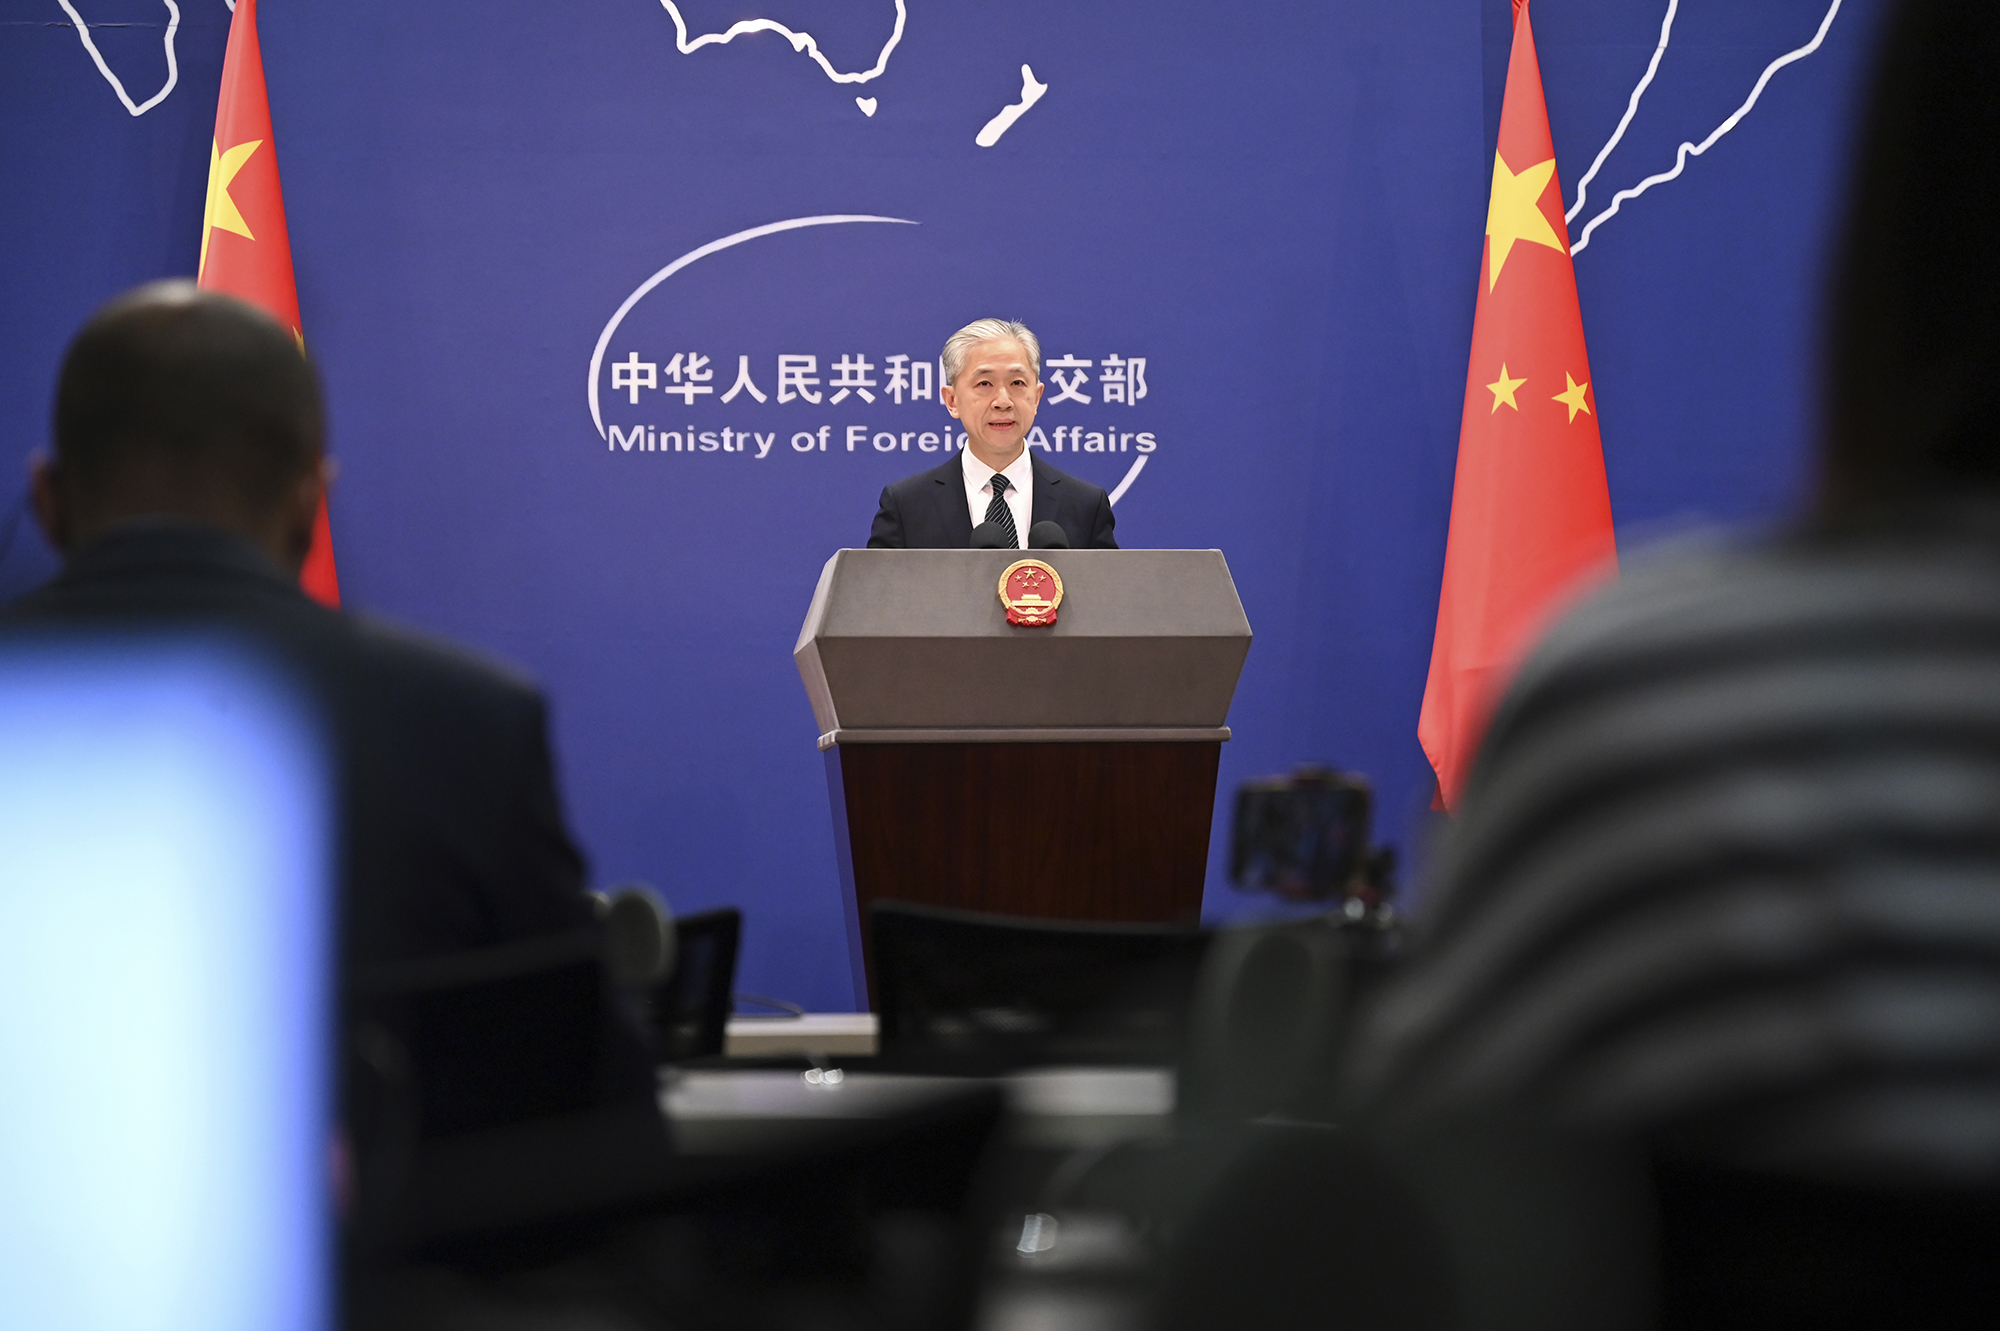 Wang Wenbin, spokesman for the Chinese Foreign Ministry, speaks at a press conference in Beijing, China, on March 13.